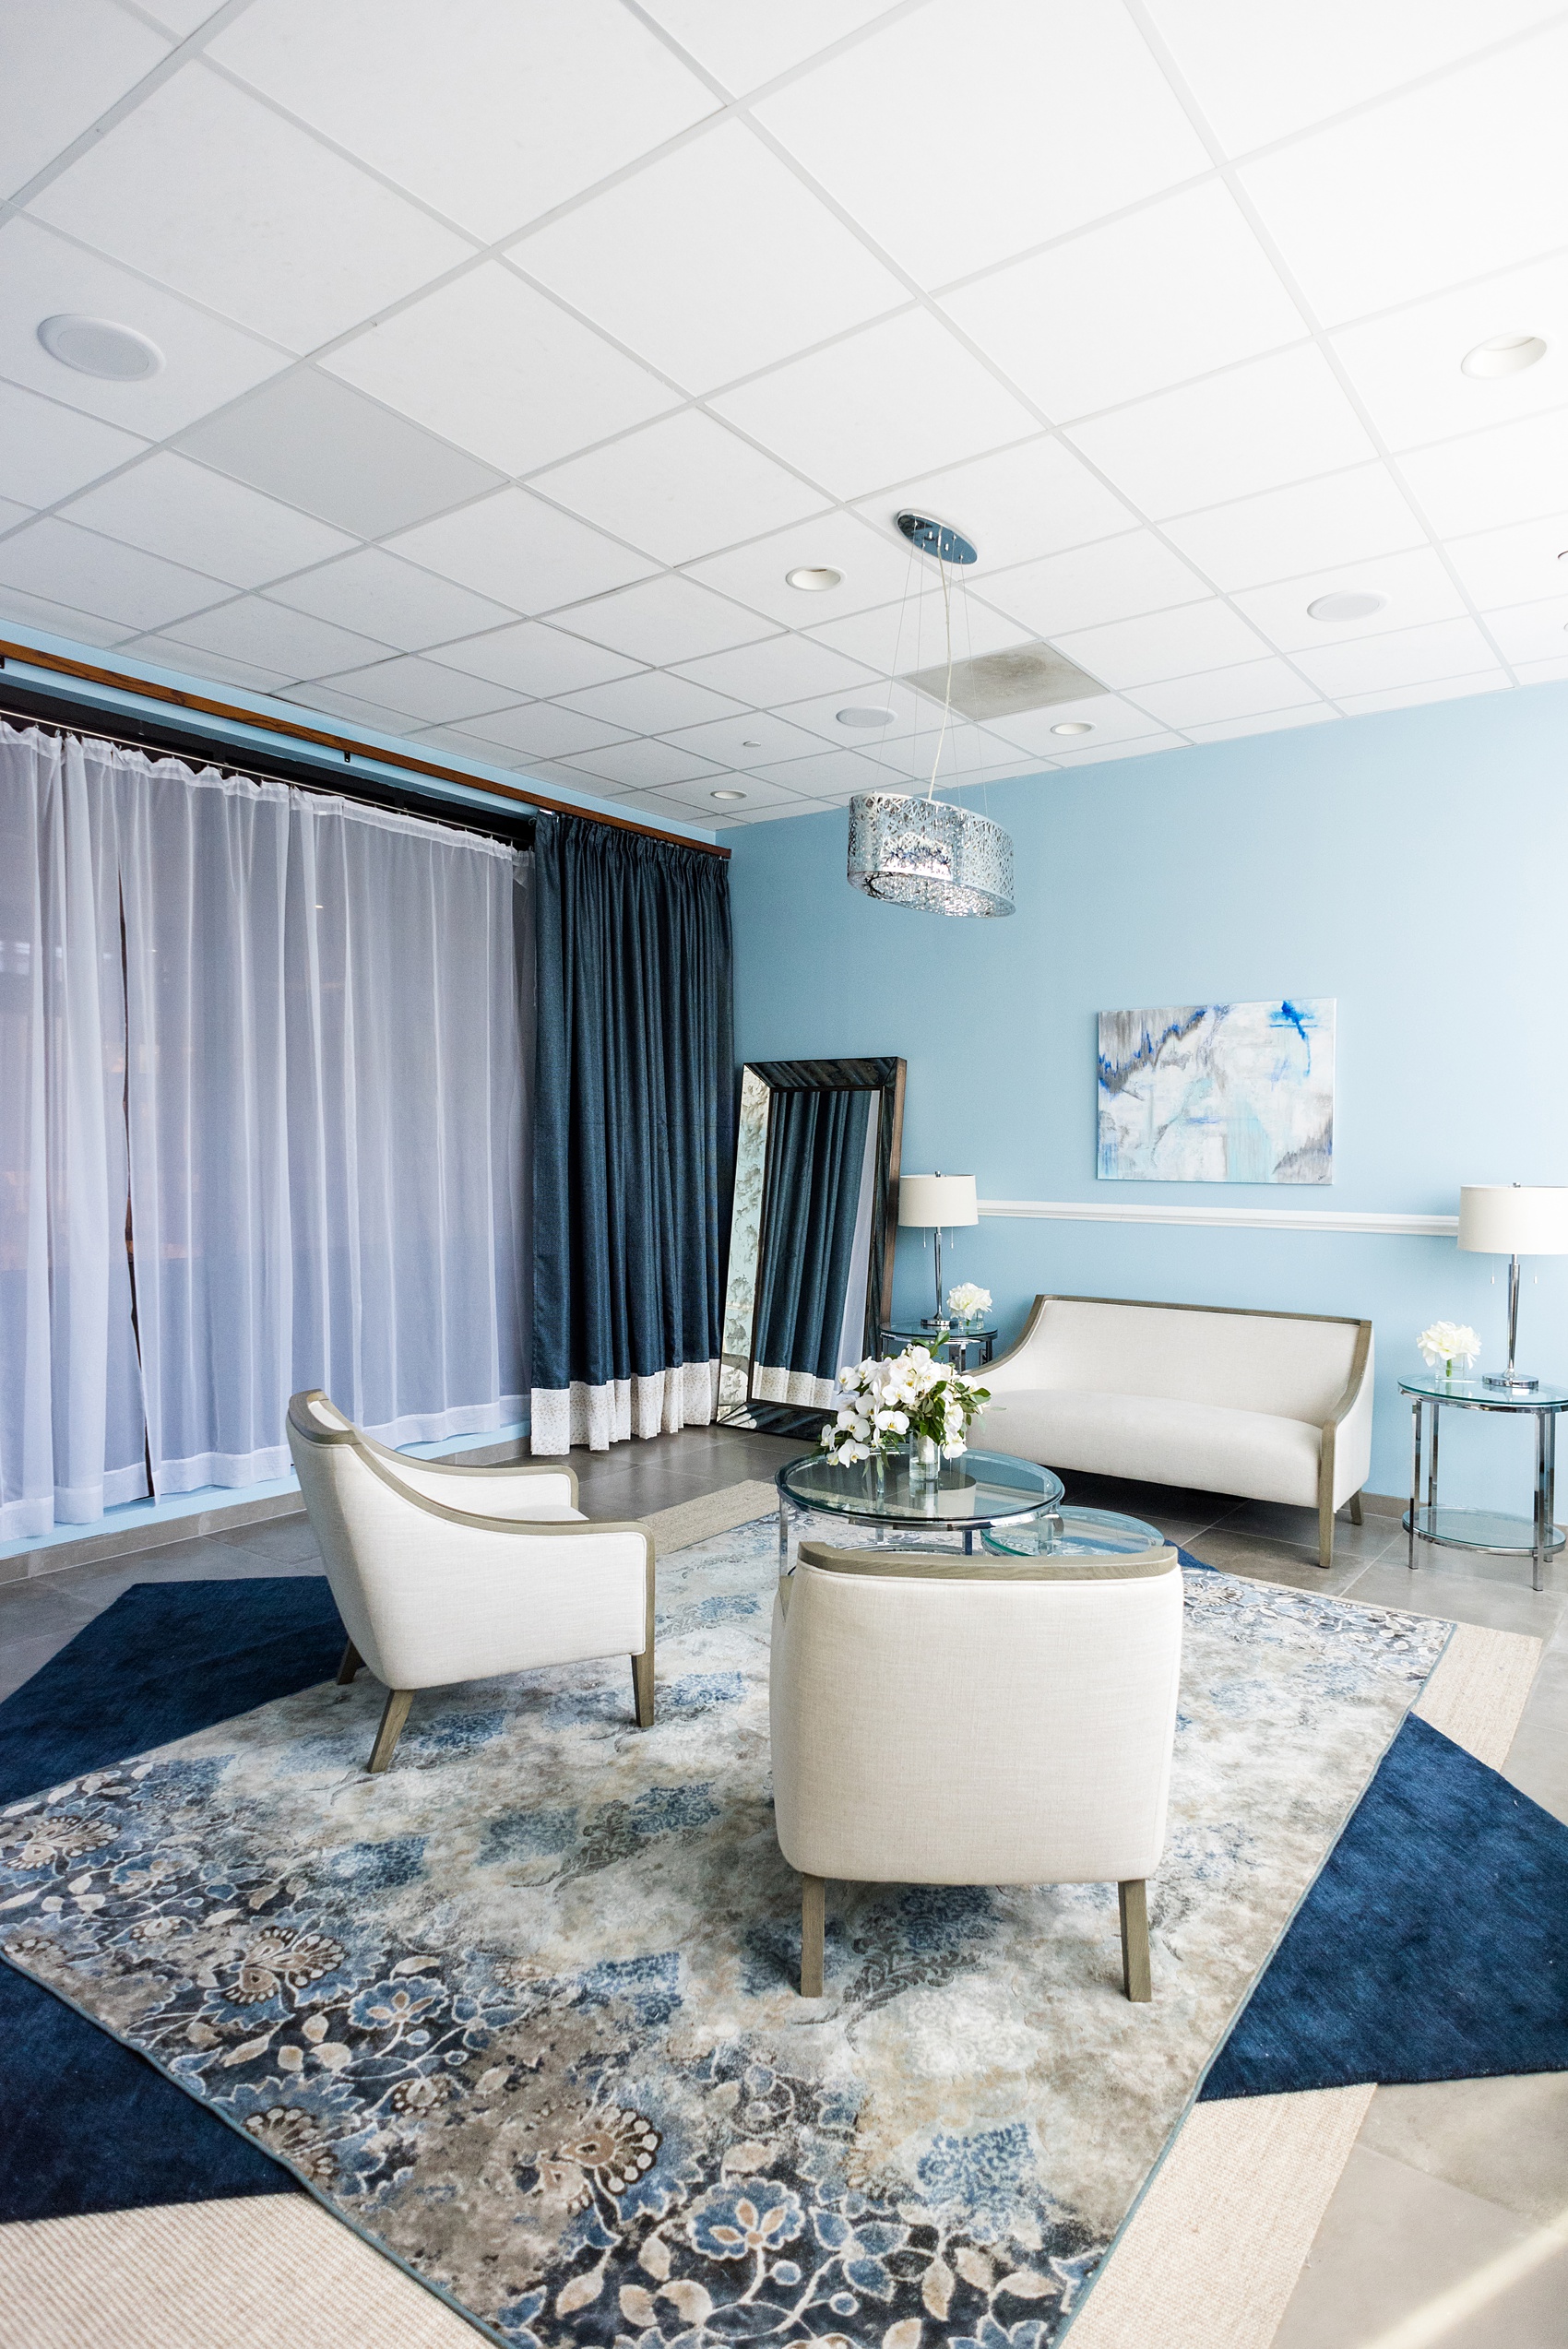 Downtown Raleigh wedding venue photos of Vidrio on Glenwood South, and their beautiful new bridal suite. Blue hues and neutral furniture are framed by paintings and a full length mirror in this beautiful space. #MikkelPaige #Vidrio #DowntownRaleigh #RalegihWeddingVenues